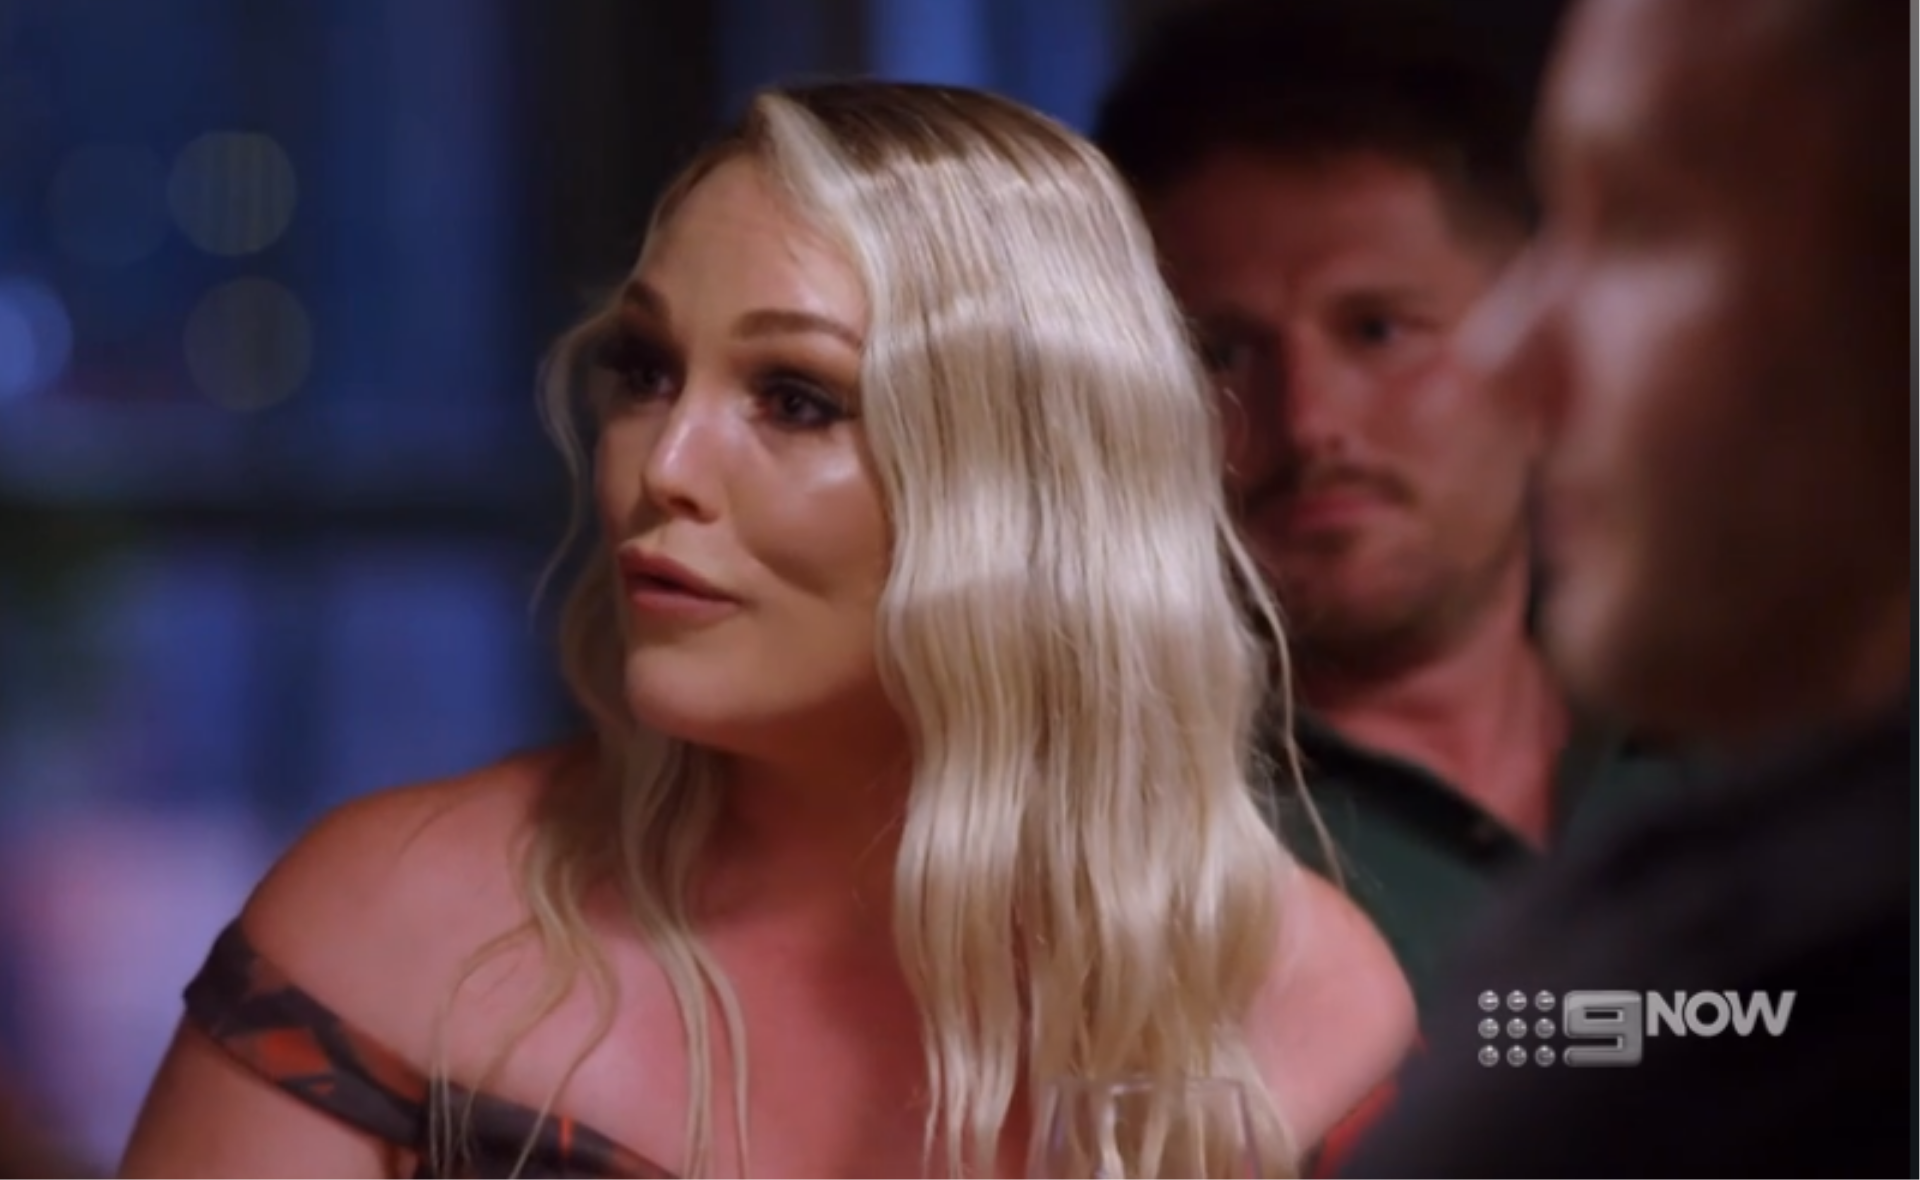 MAFS’ Bryce was allegedly dating his “secret girlfriend” up until a DAY before his final vows to Melissa